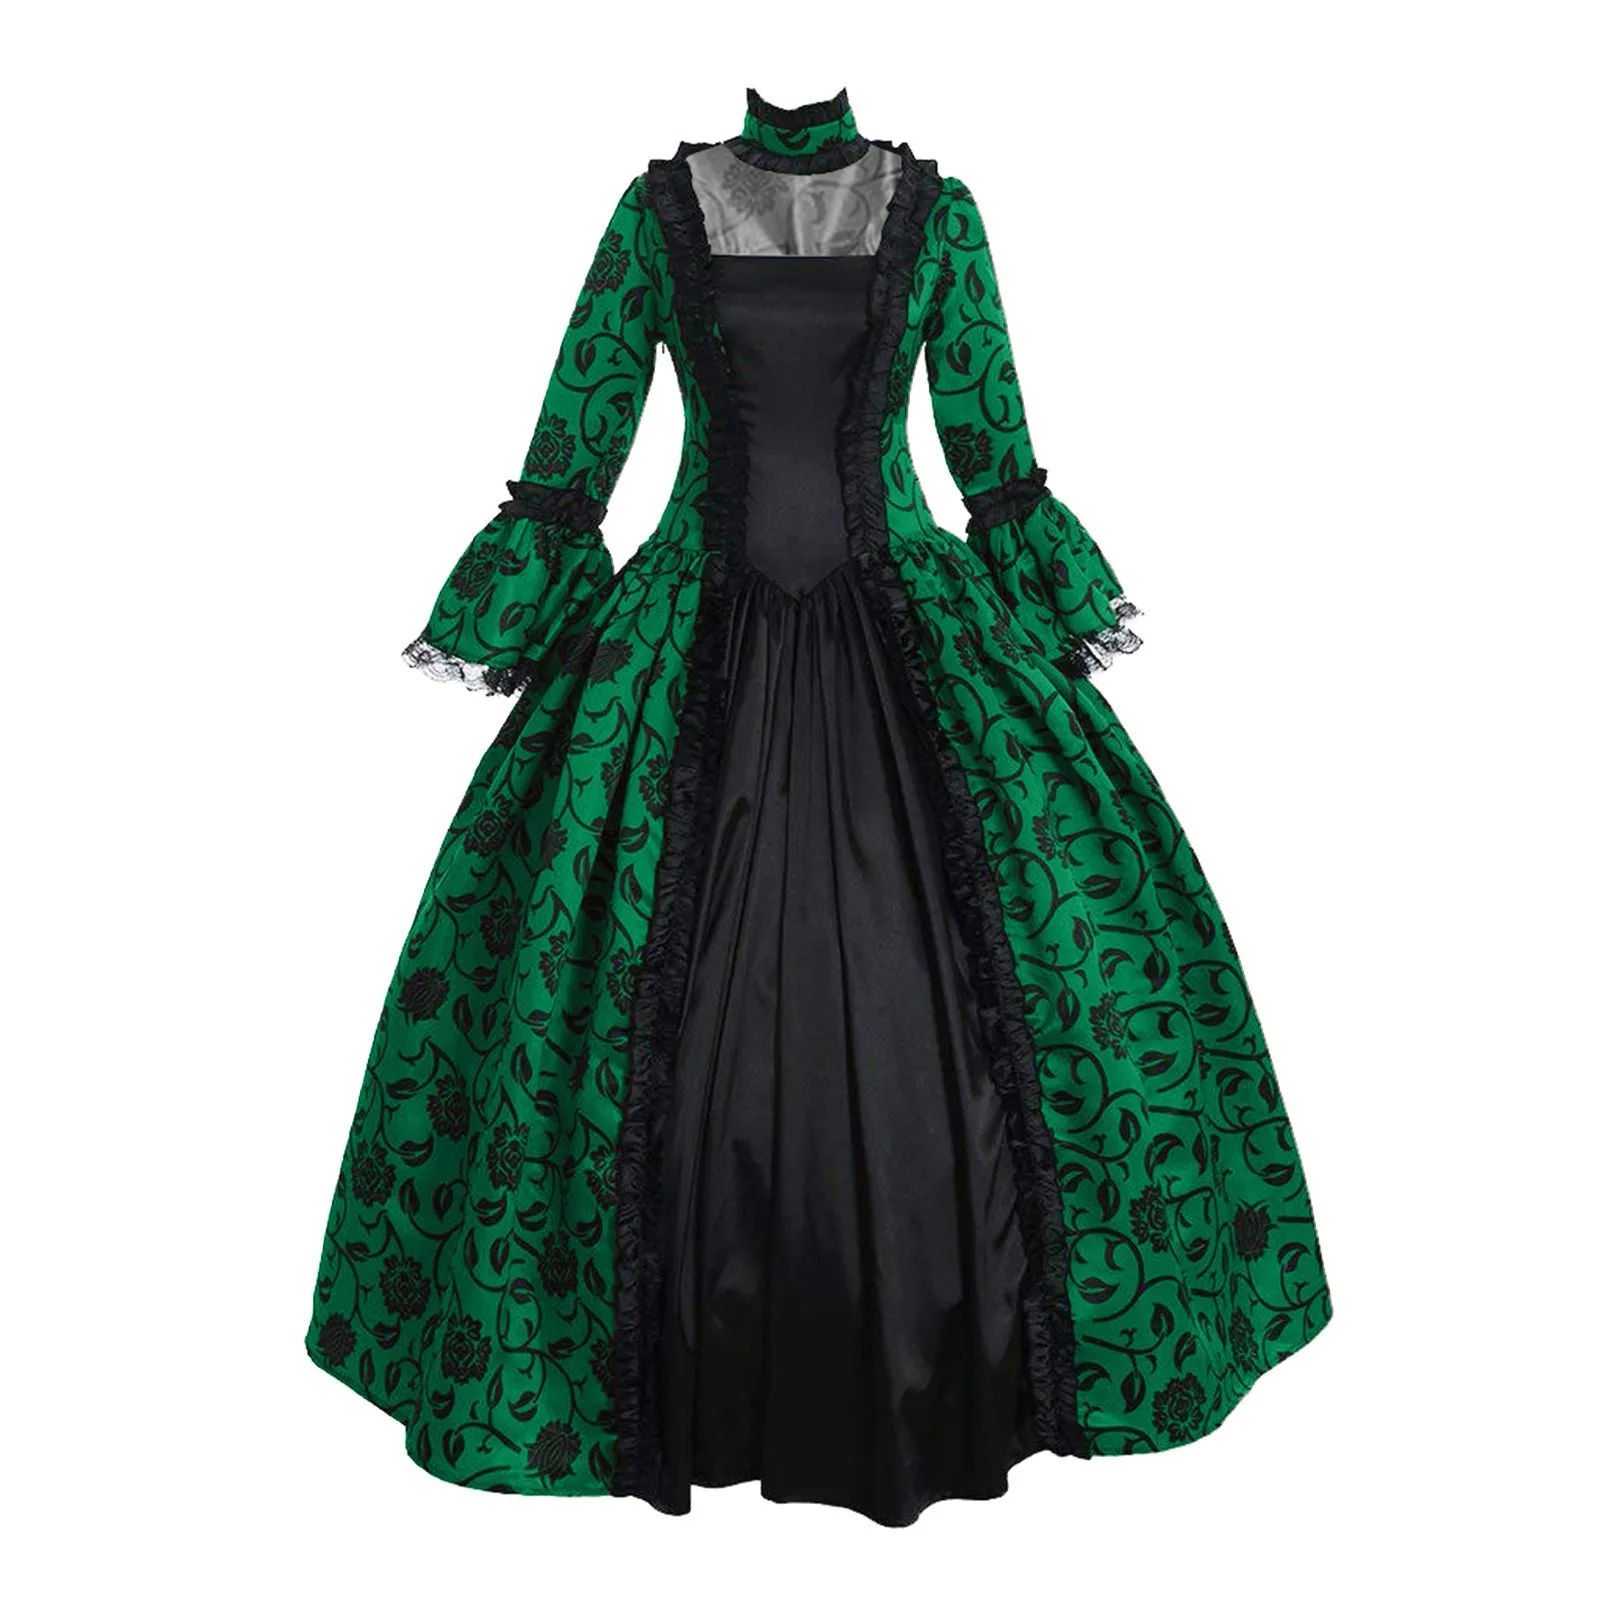 

Plus Size 5XL Steampunk Vintage Women Medieval Dress Gothic Lady Vampire Lace Sleeve Halloween Costume Wholesale Dropshipping